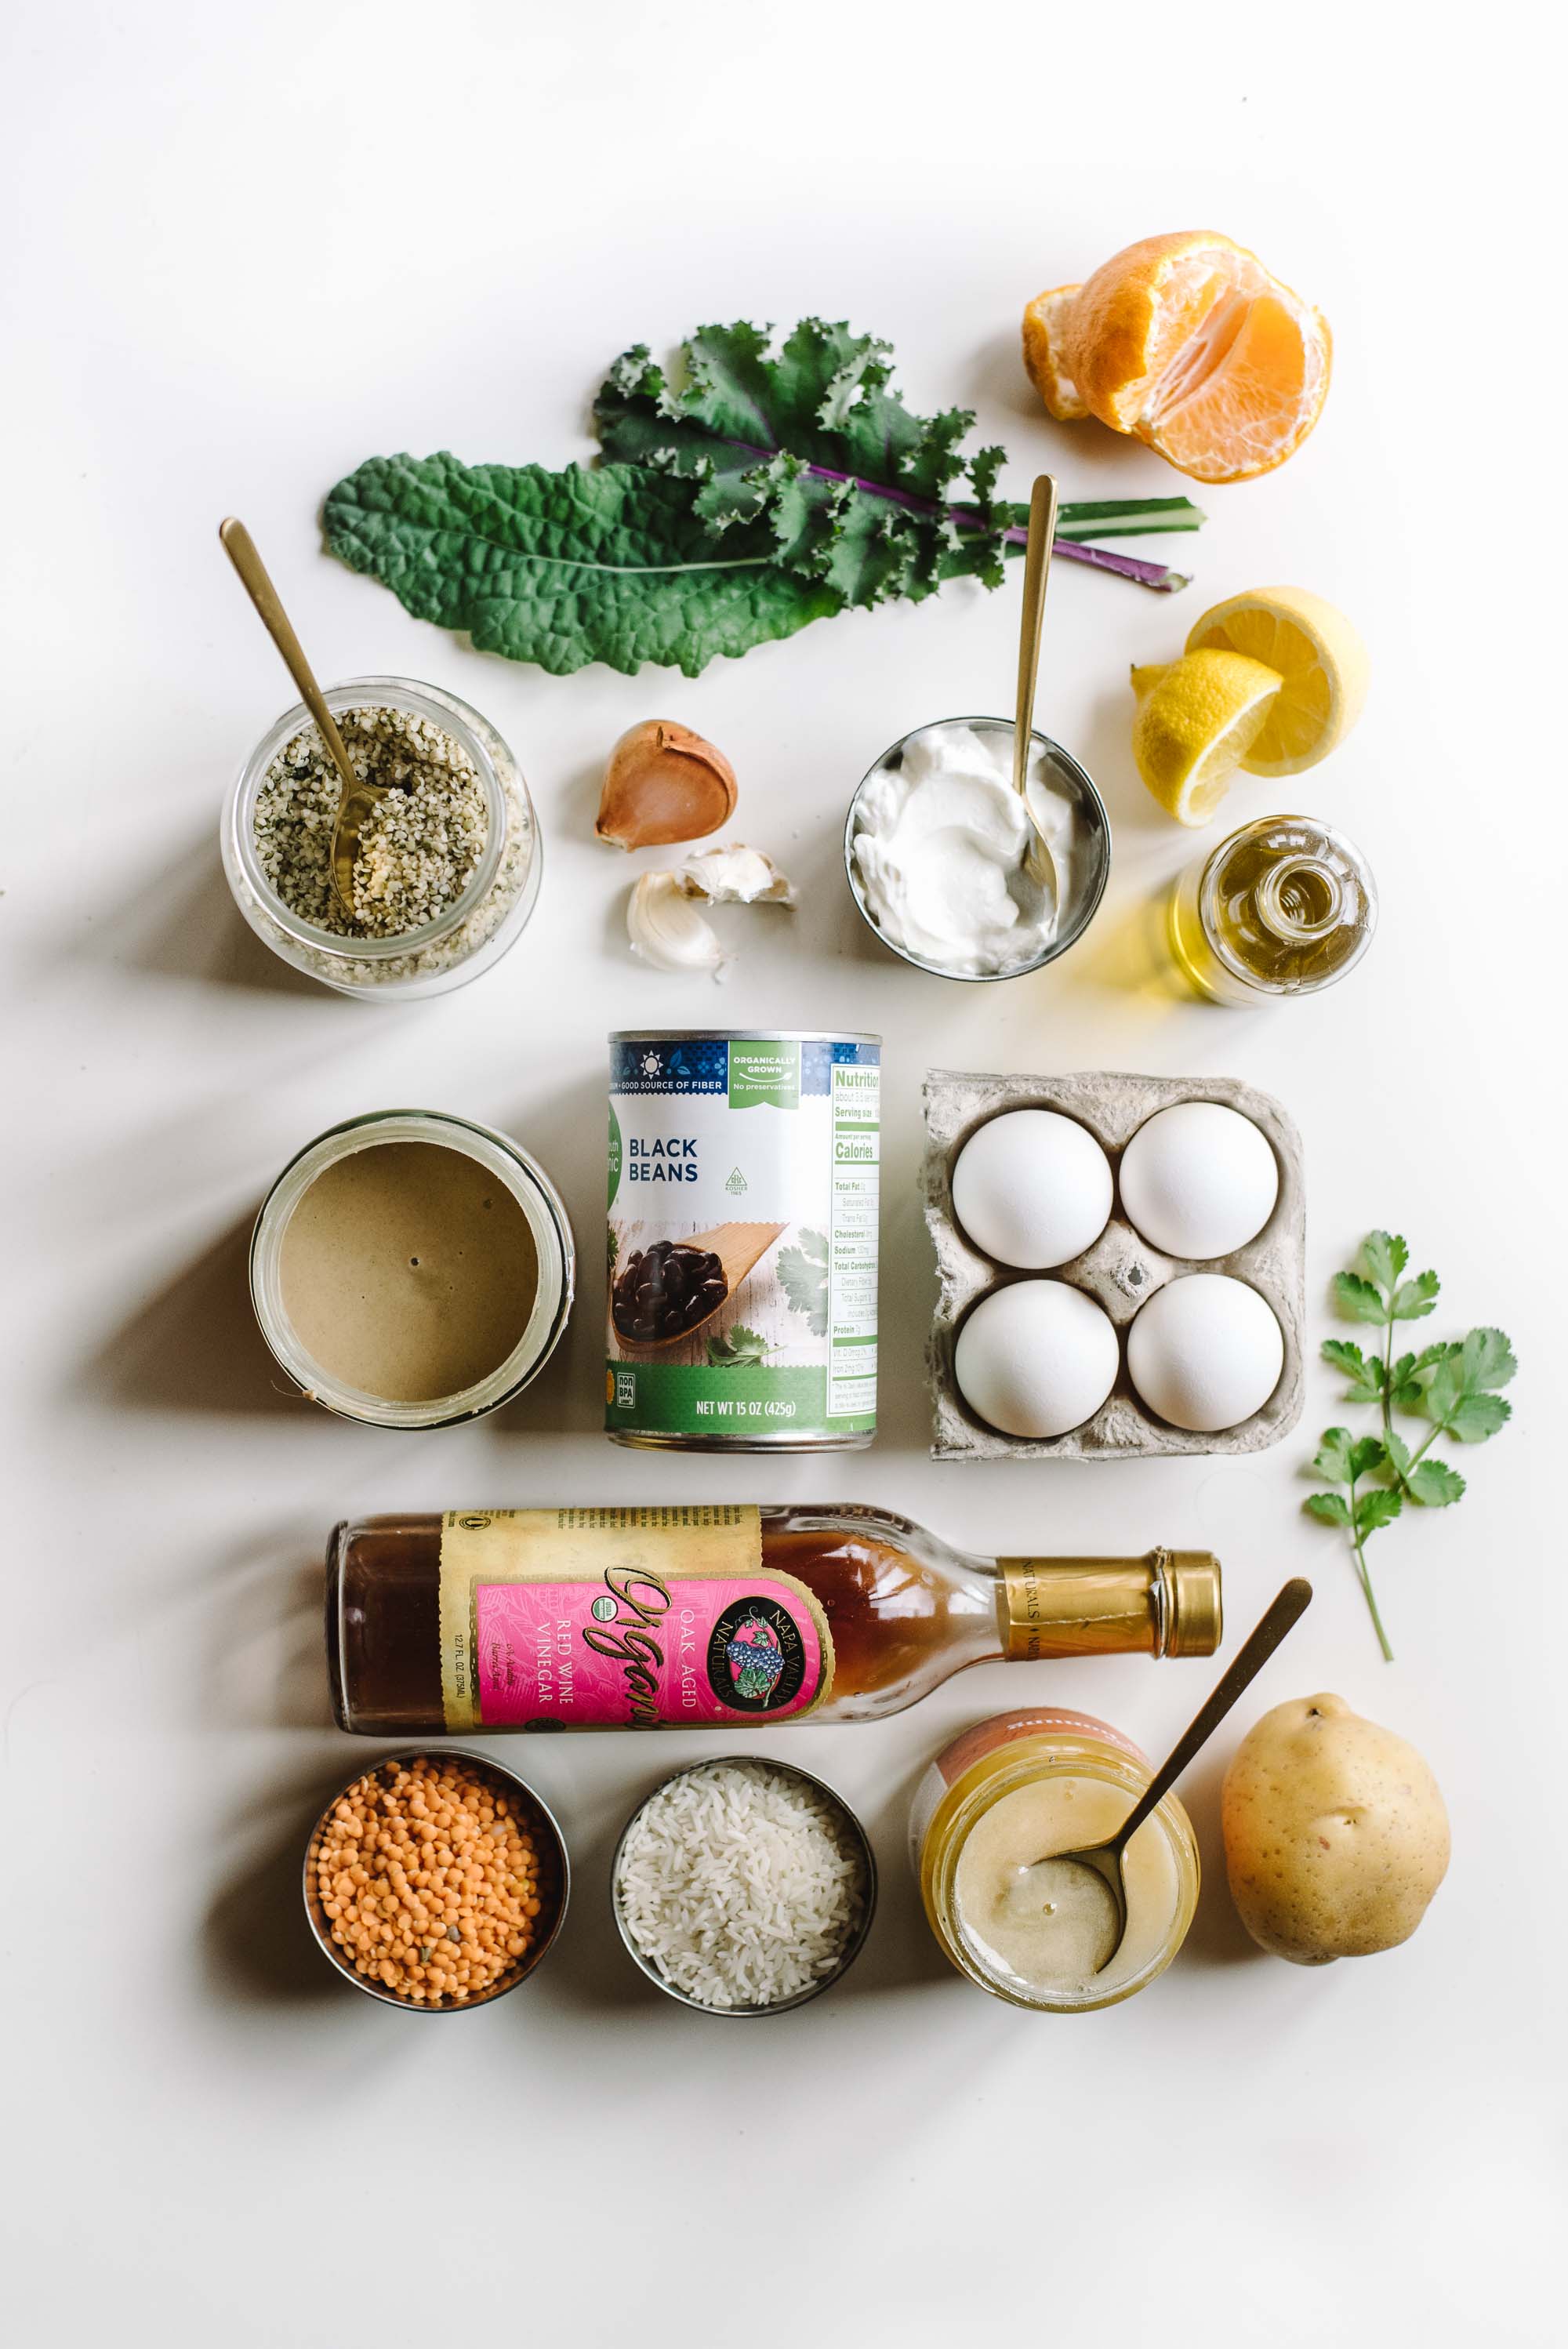 Wellness Made Simple: How to Stock a Basic Vegetarian Kitchen